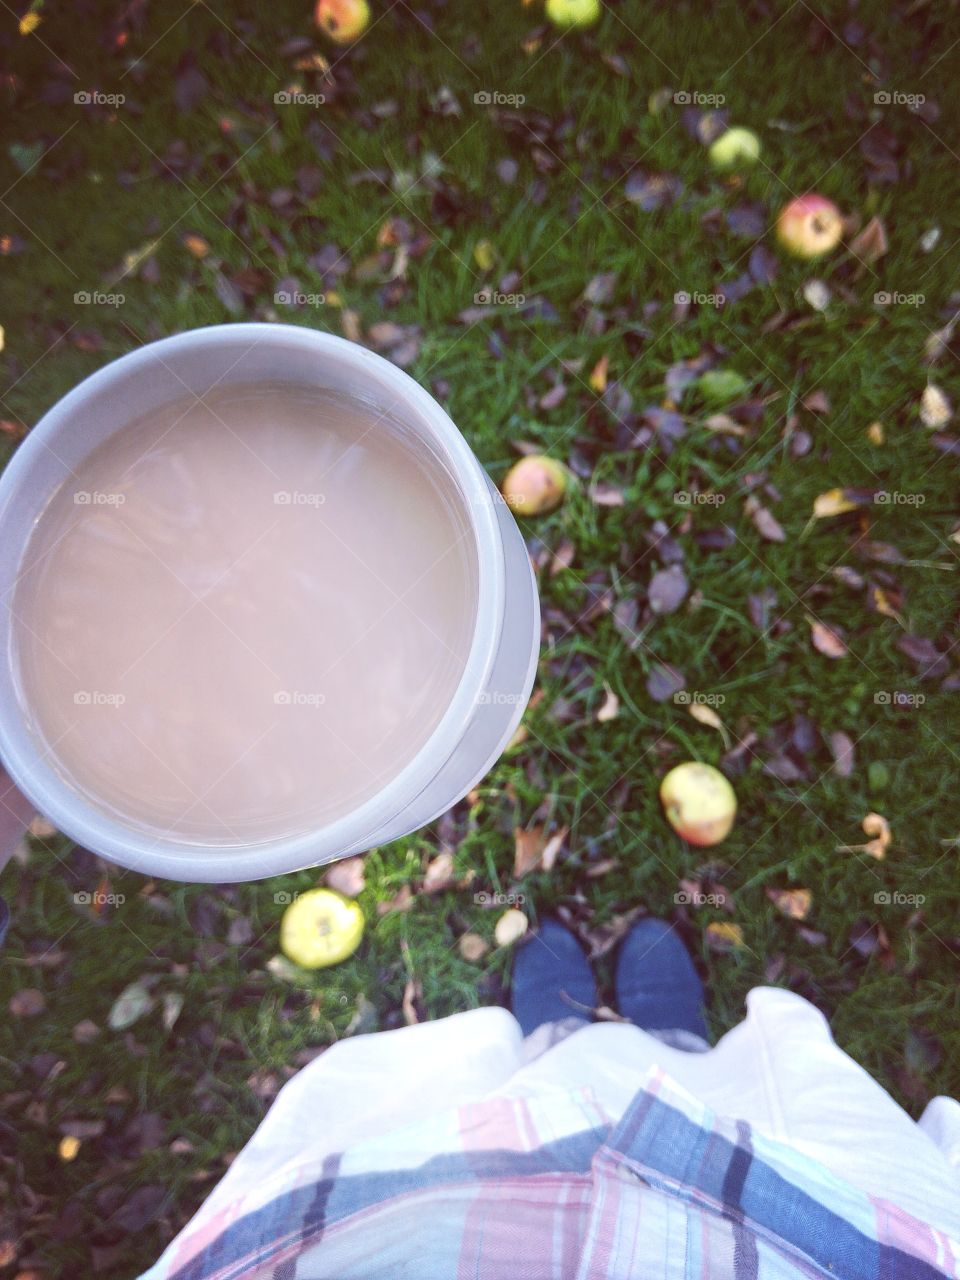 Tea, boots, apples, and leaves